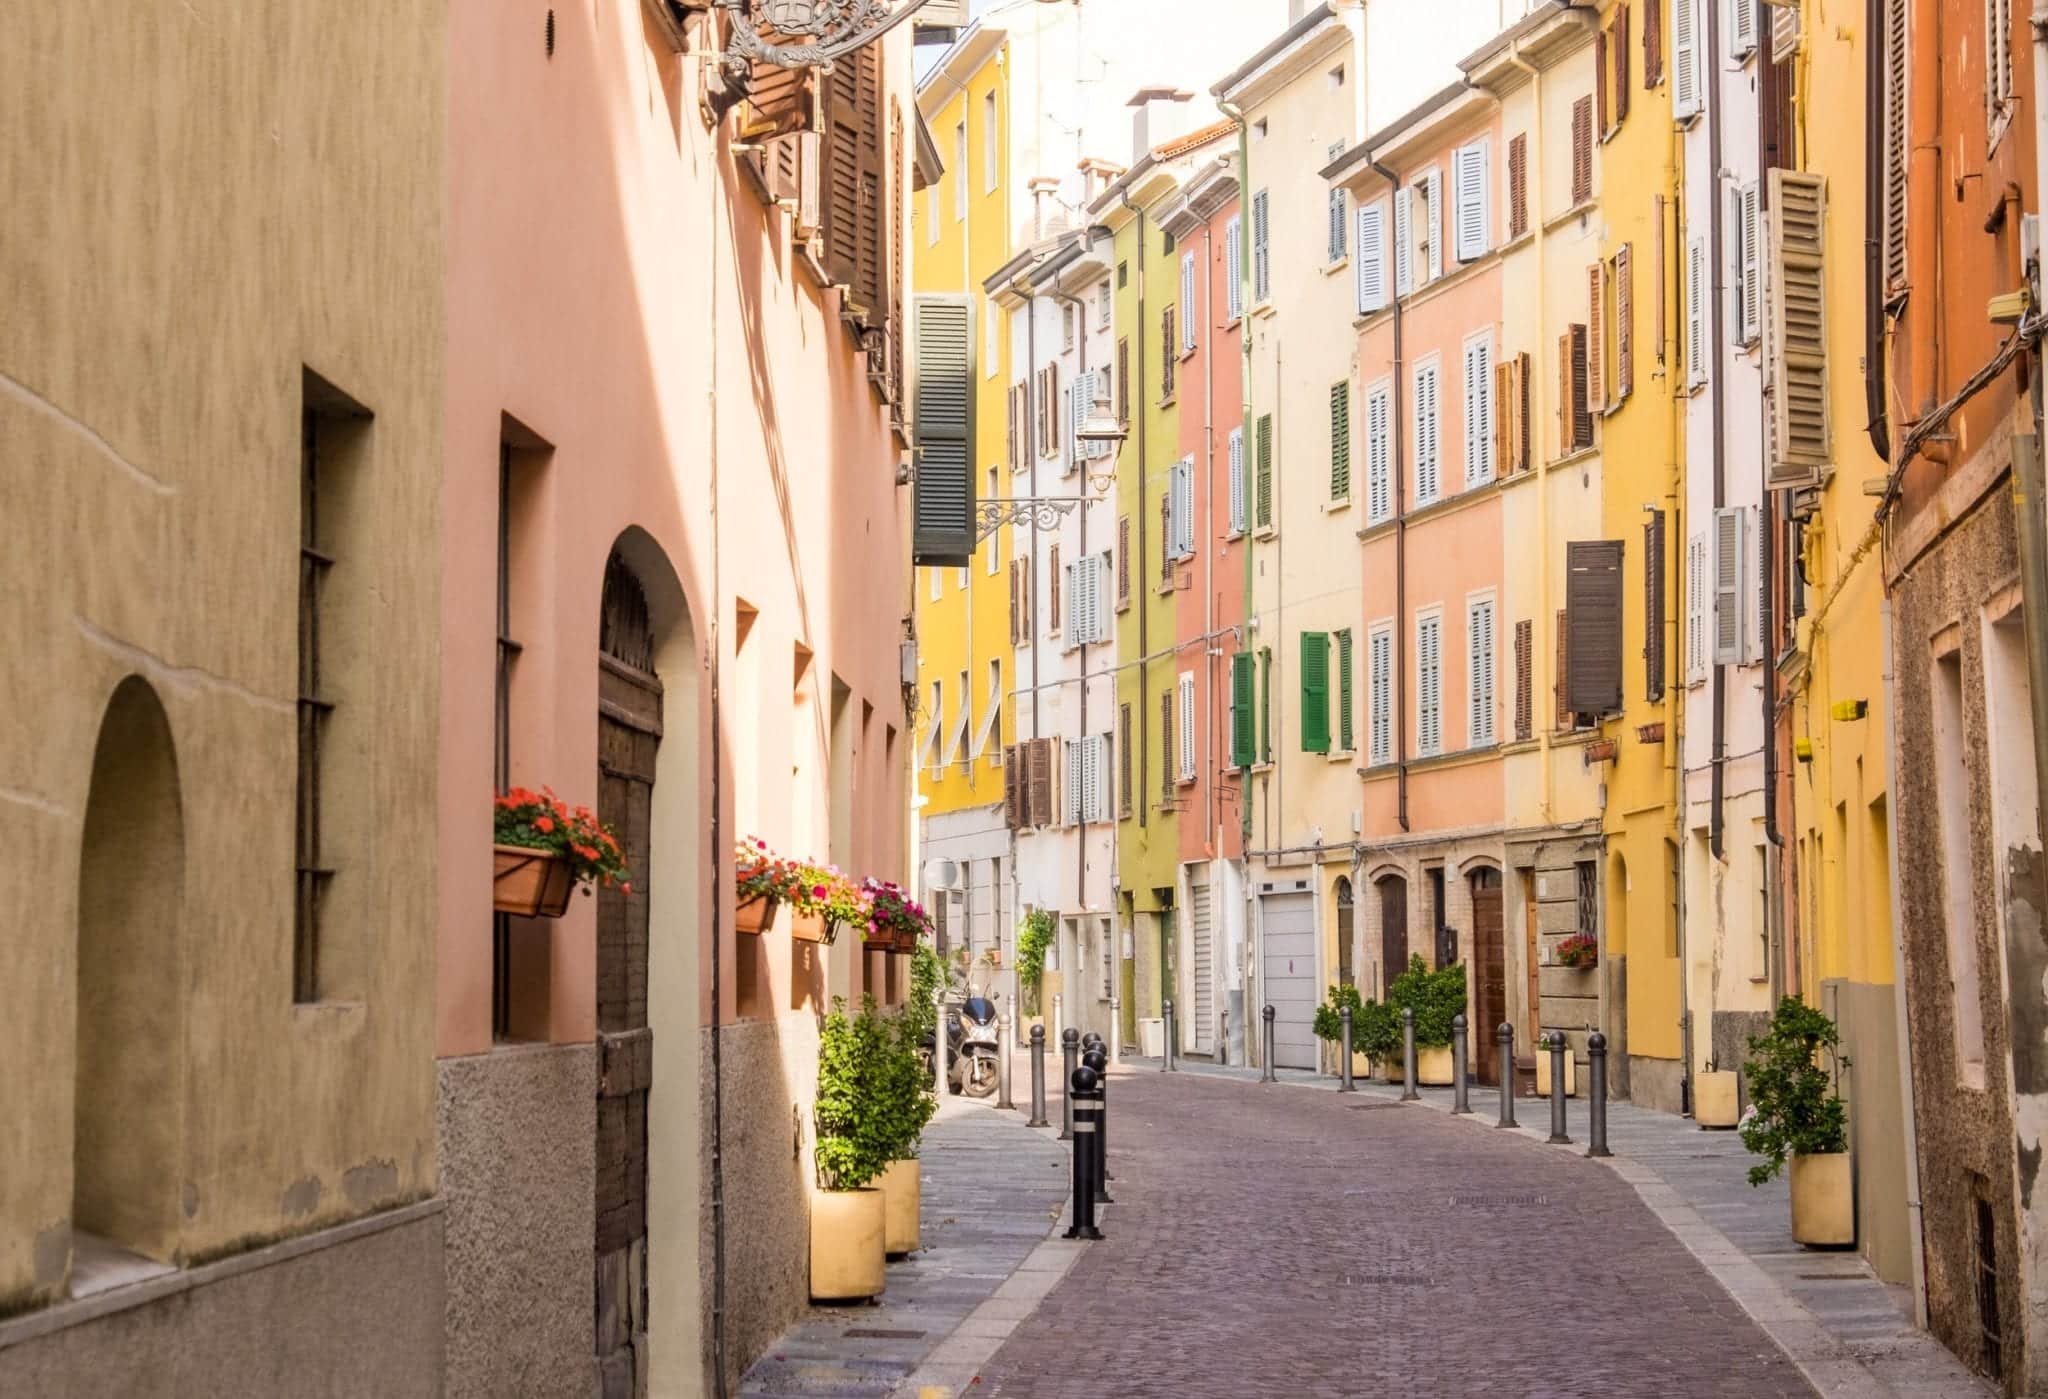 A colorful street in Parma with yellow, pale red, and orange buildings stacked together, each with green shutters.